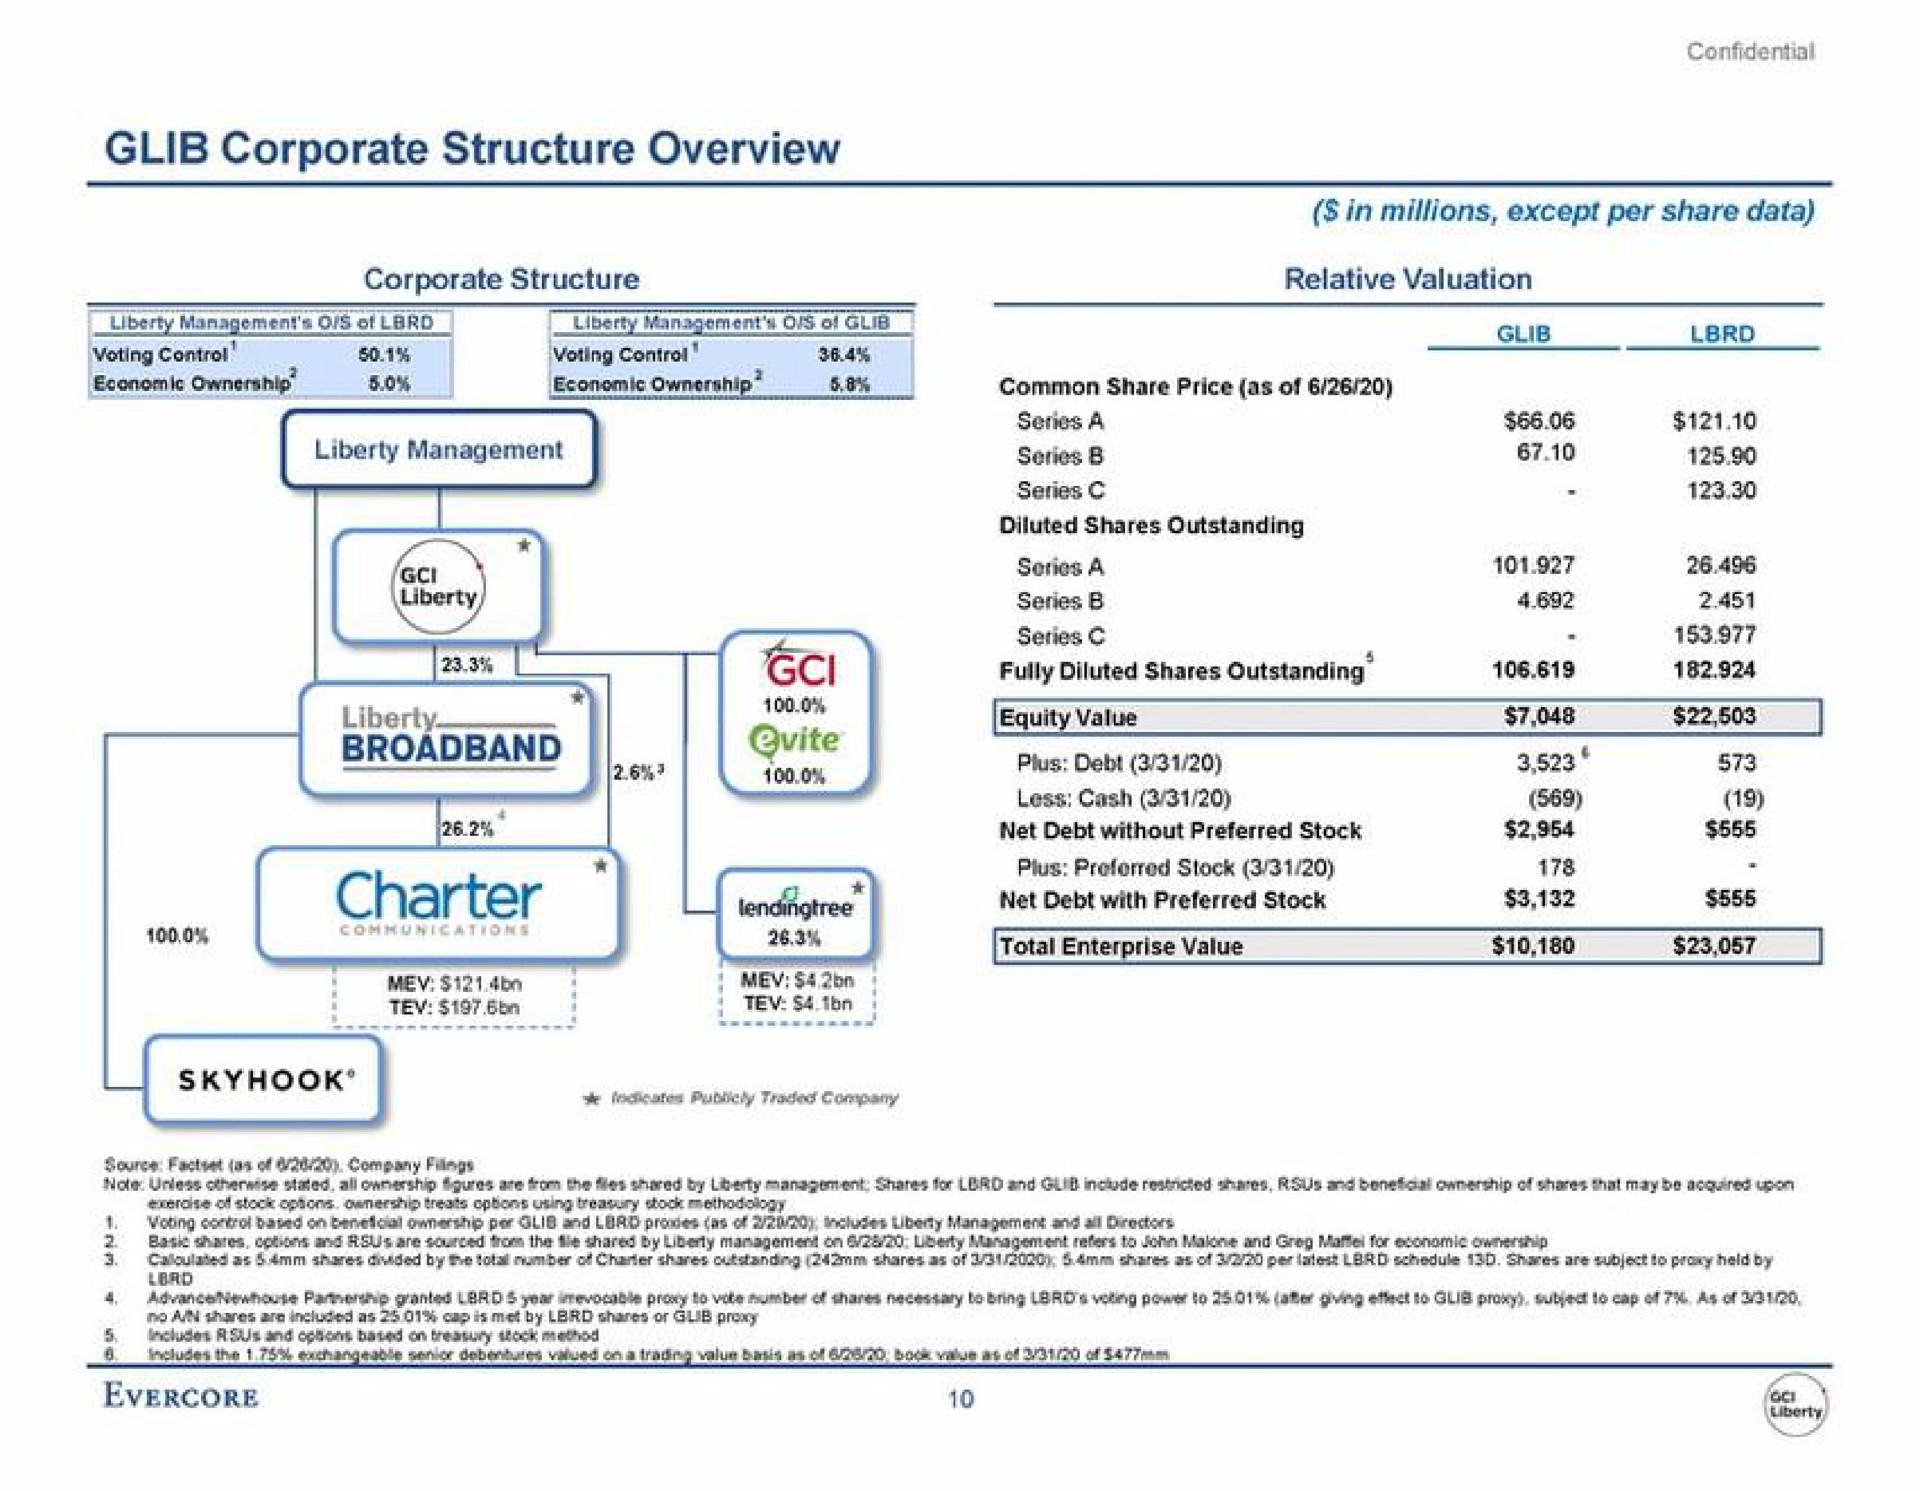 glib corporate structure overview fully diluted shares outstanding equity value plus debt | Evercore